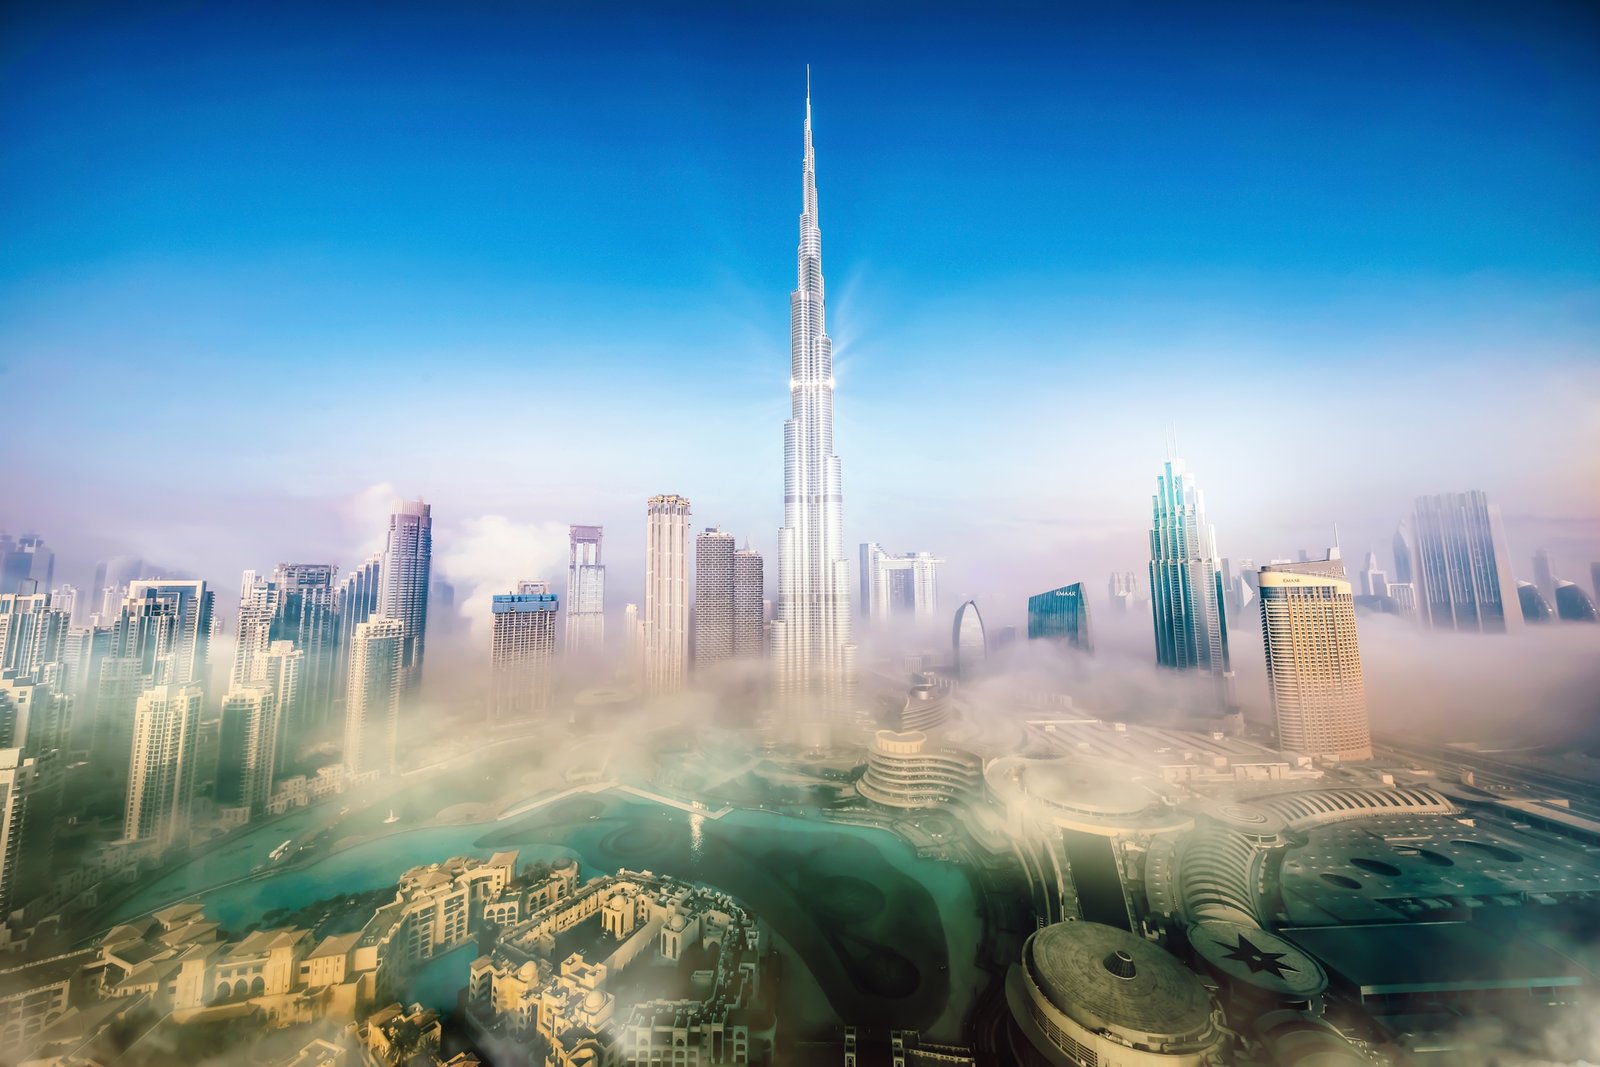 Dubai welcomes 7.28 million overnight visitors in 2021, setting a momentous marker for global tourism recovery